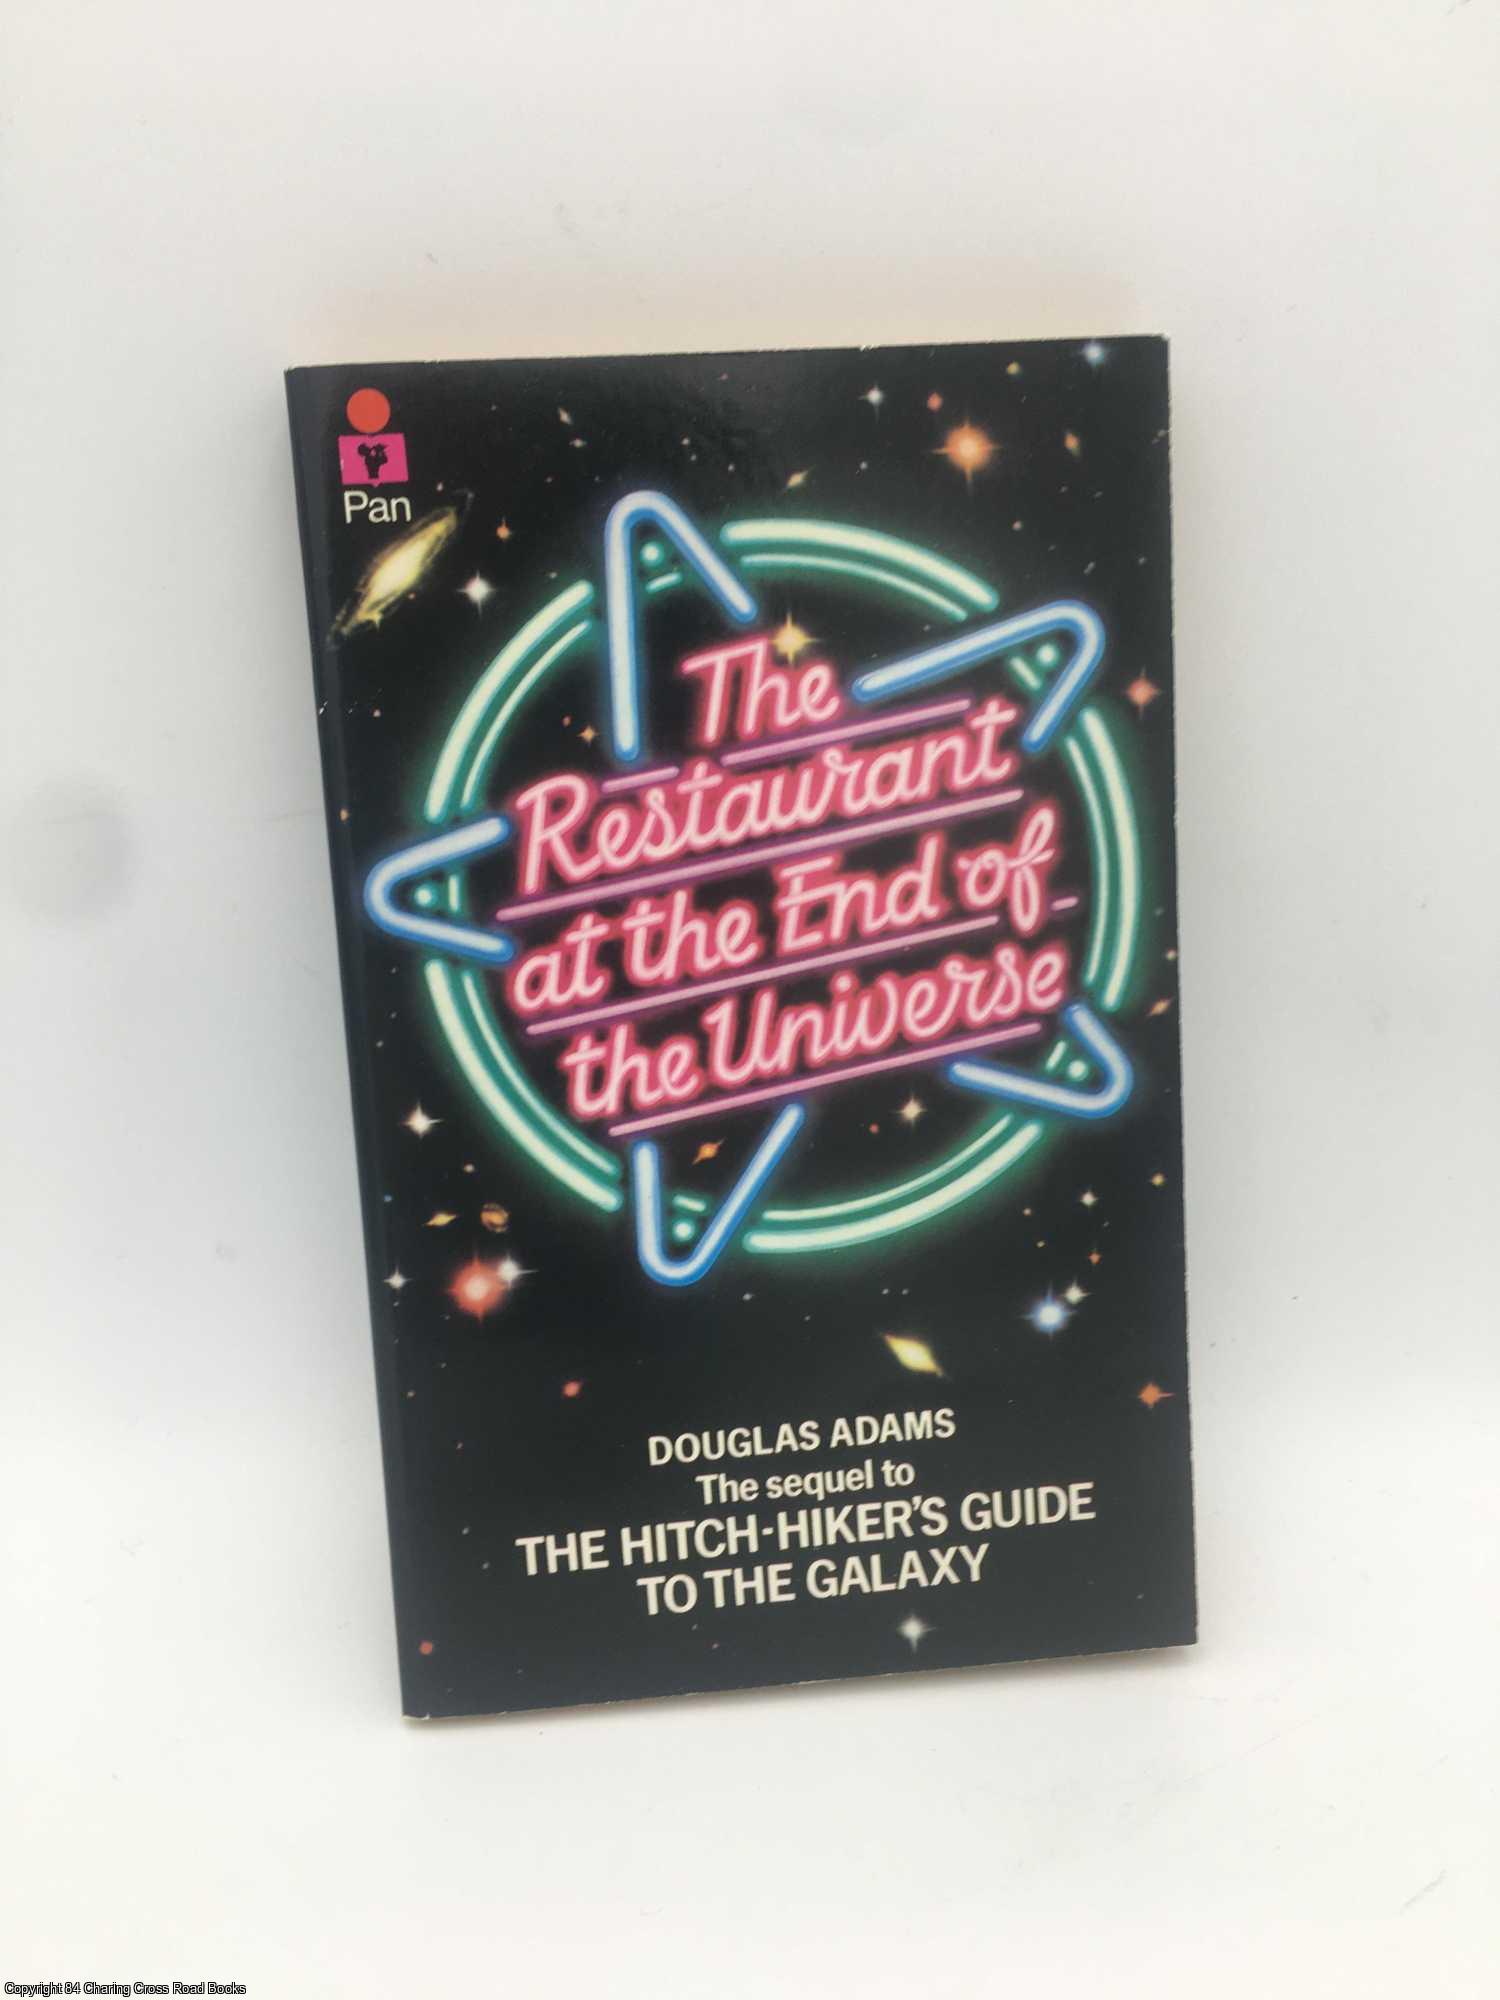 Adams, Douglas - The Restaurant at the End of the Universe